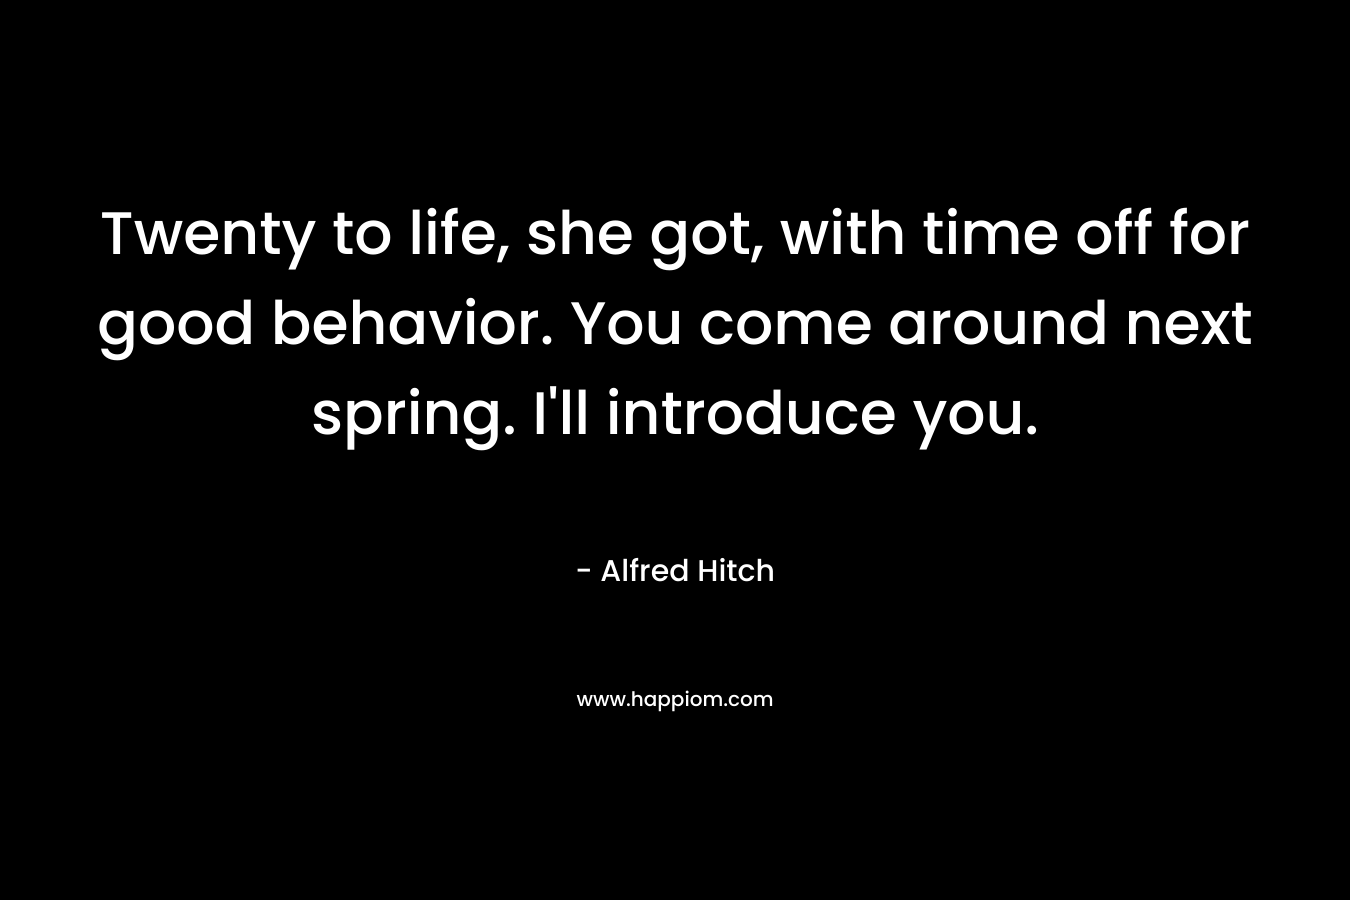 Twenty to life, she got, with time off for good behavior. You come around next spring. I’ll introduce you. – Alfred Hitch